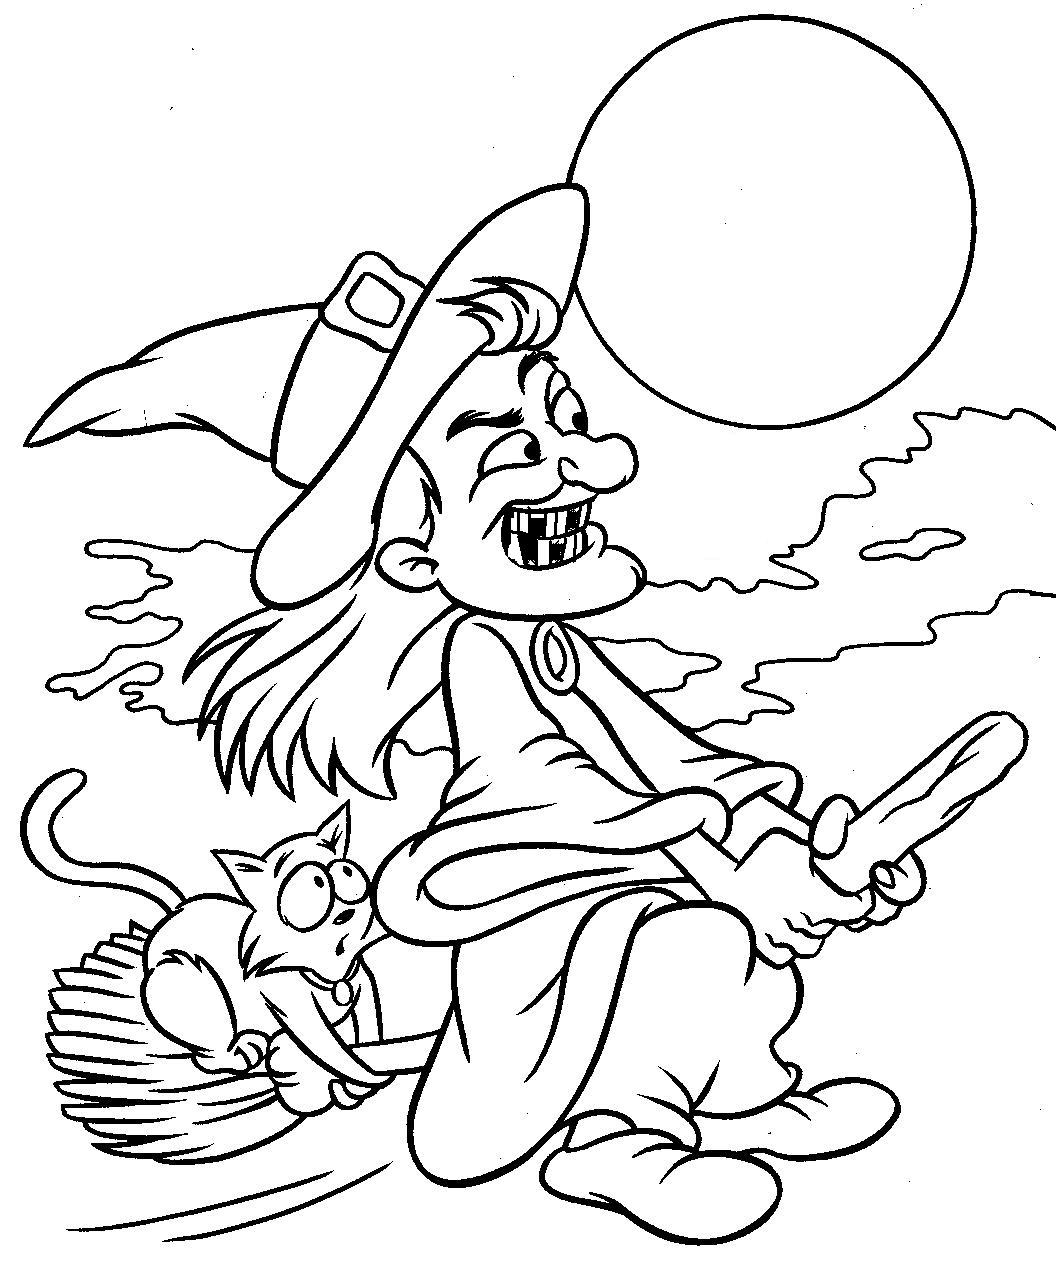 halloween coloring pages: Witch House Coloring Pages, Halloween Witch Home